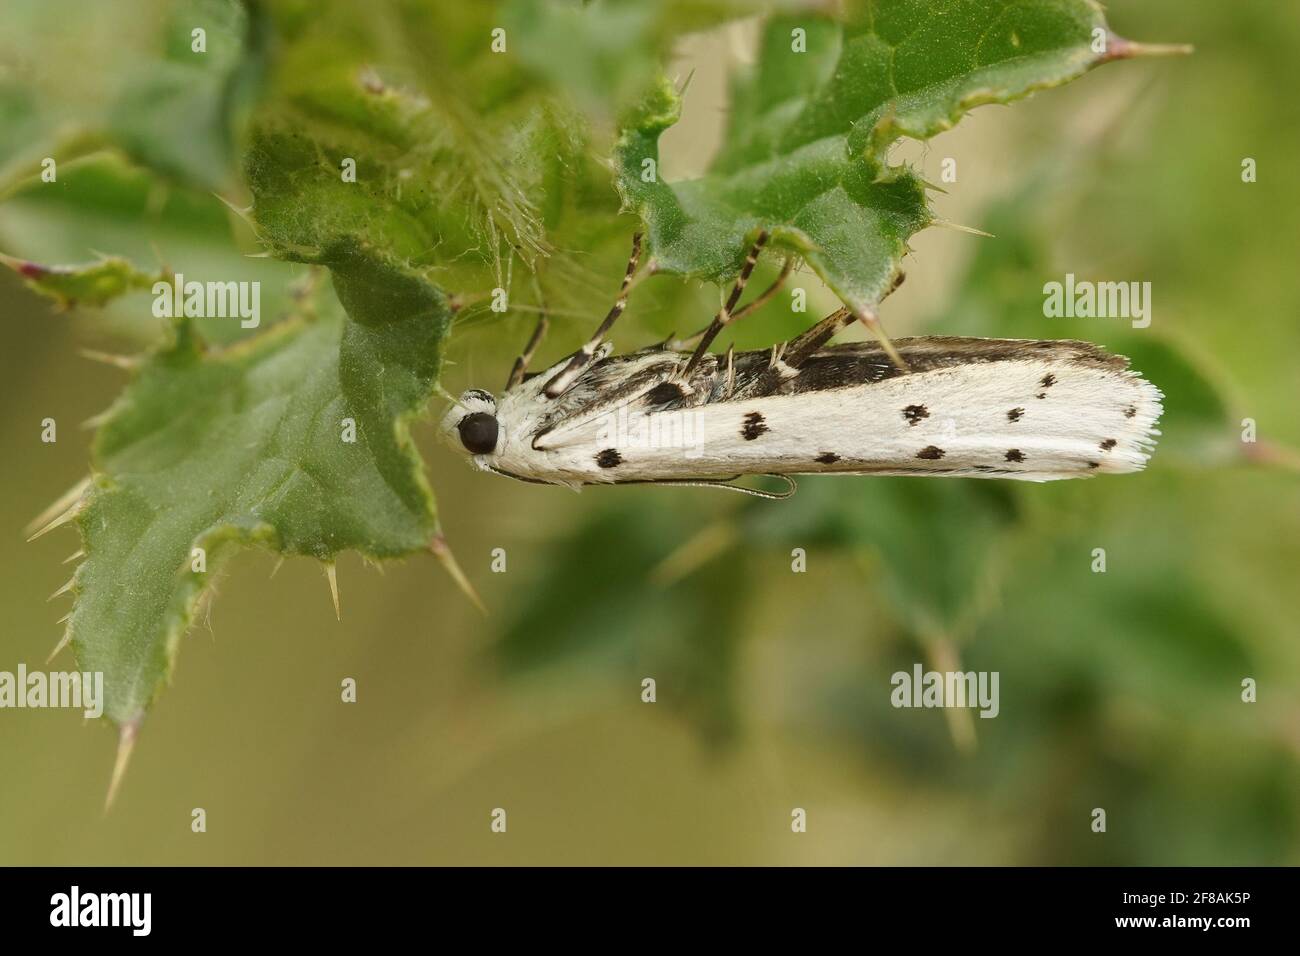 Closeup shot of a Hoary Bell moth on green leaves Stock Photo